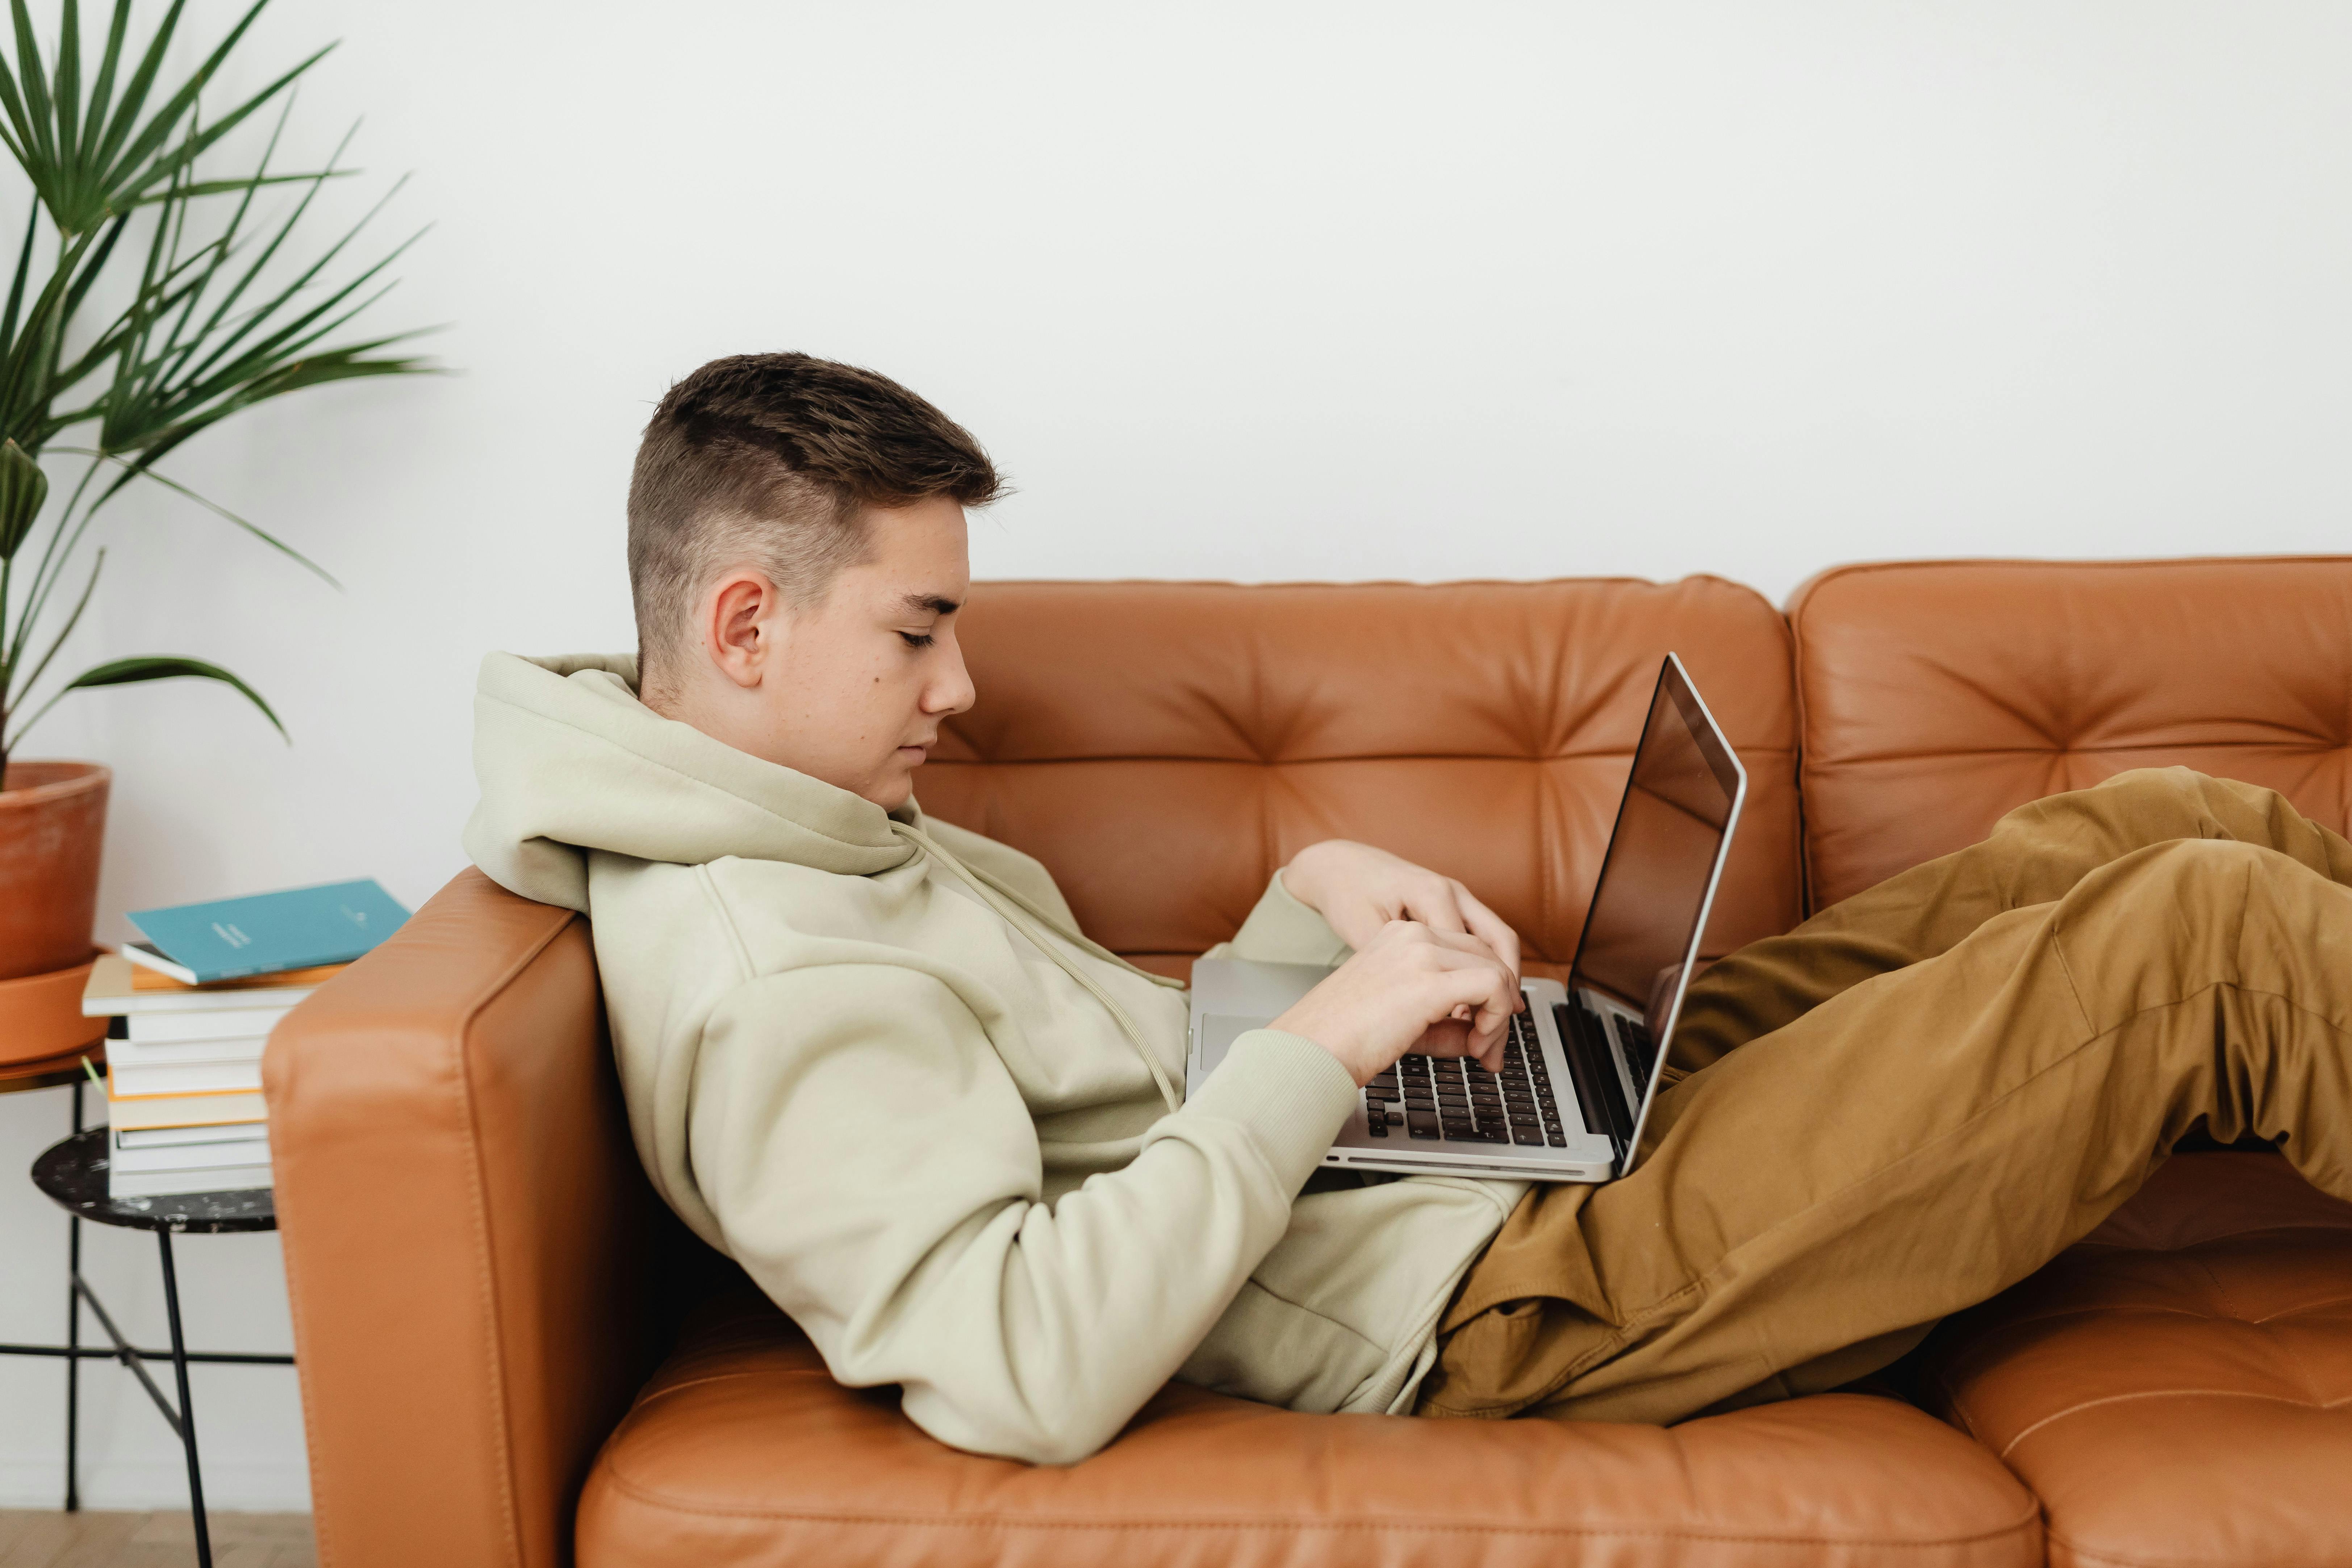 A boy typing on his laptop | Source: Pexels